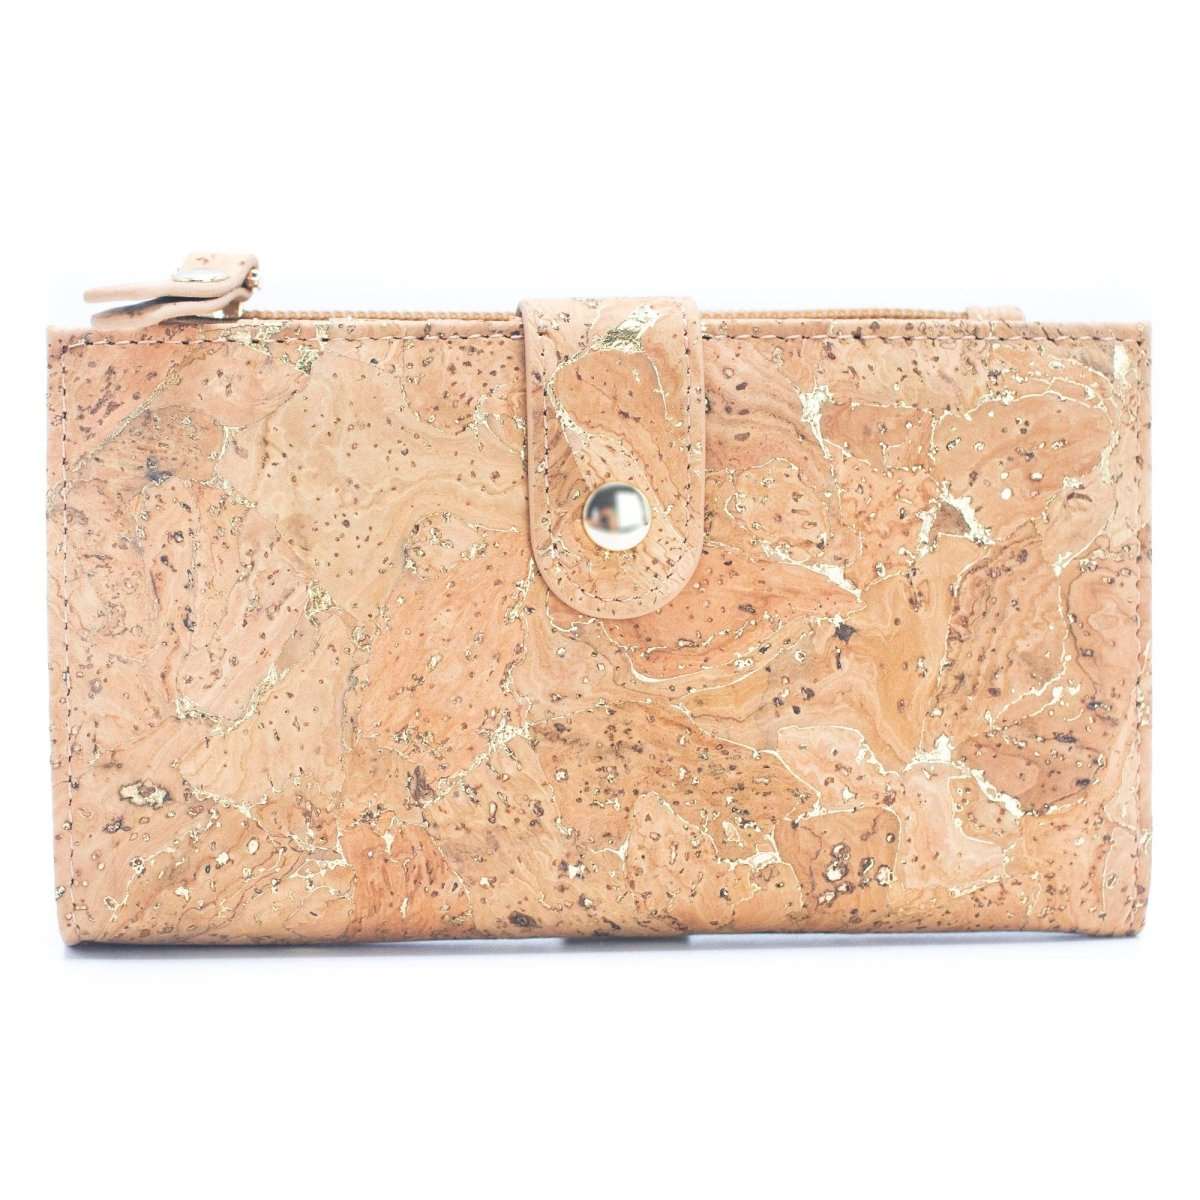 Exquisite Cork Wallet With Snap Closure -BAG-2203-A - Texas Cork Company